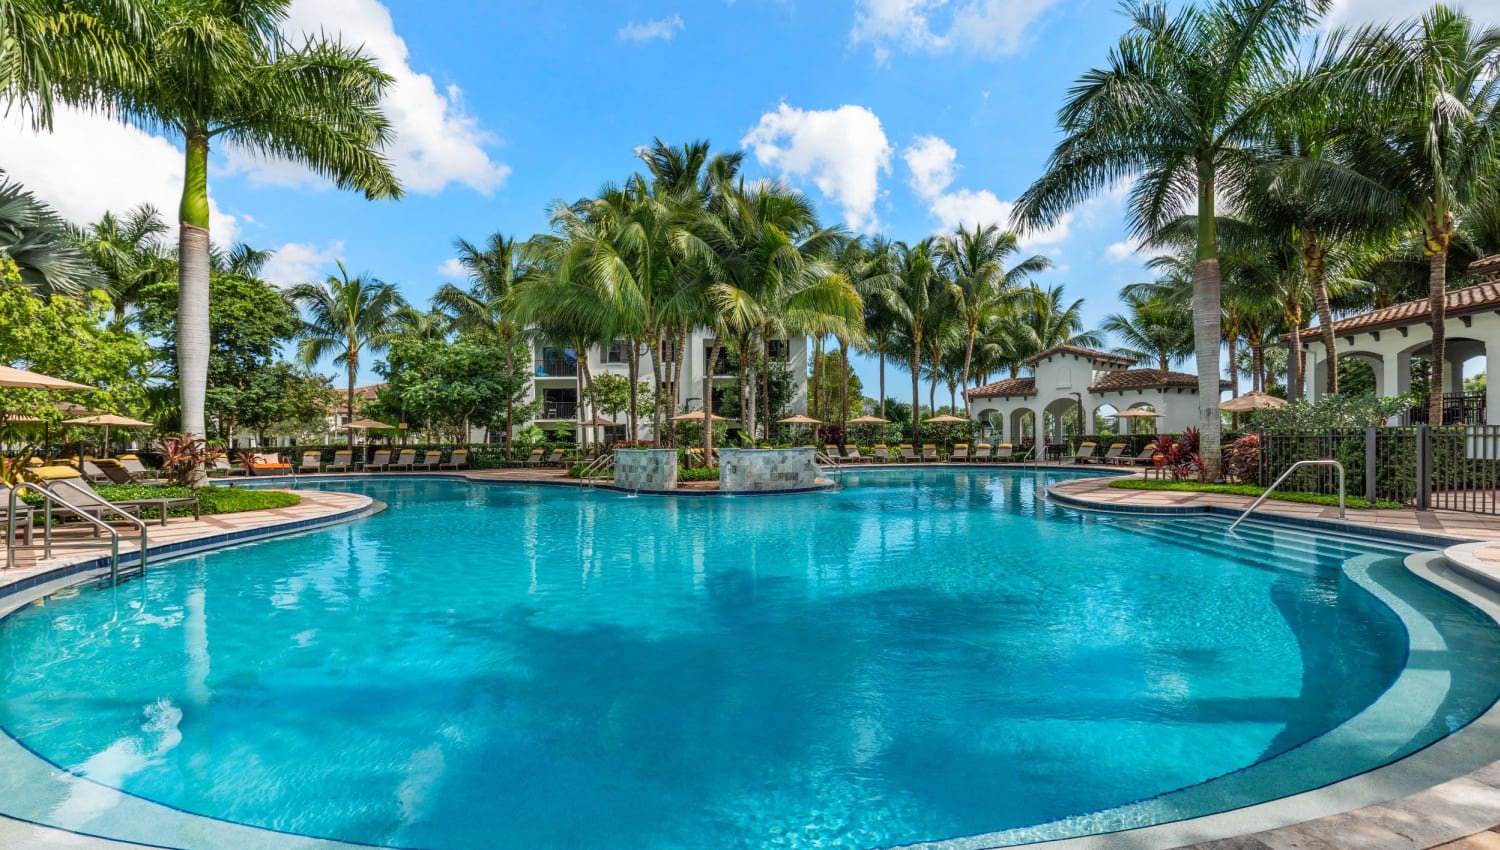 The pool at Eterno in Pompano Beach, Florida